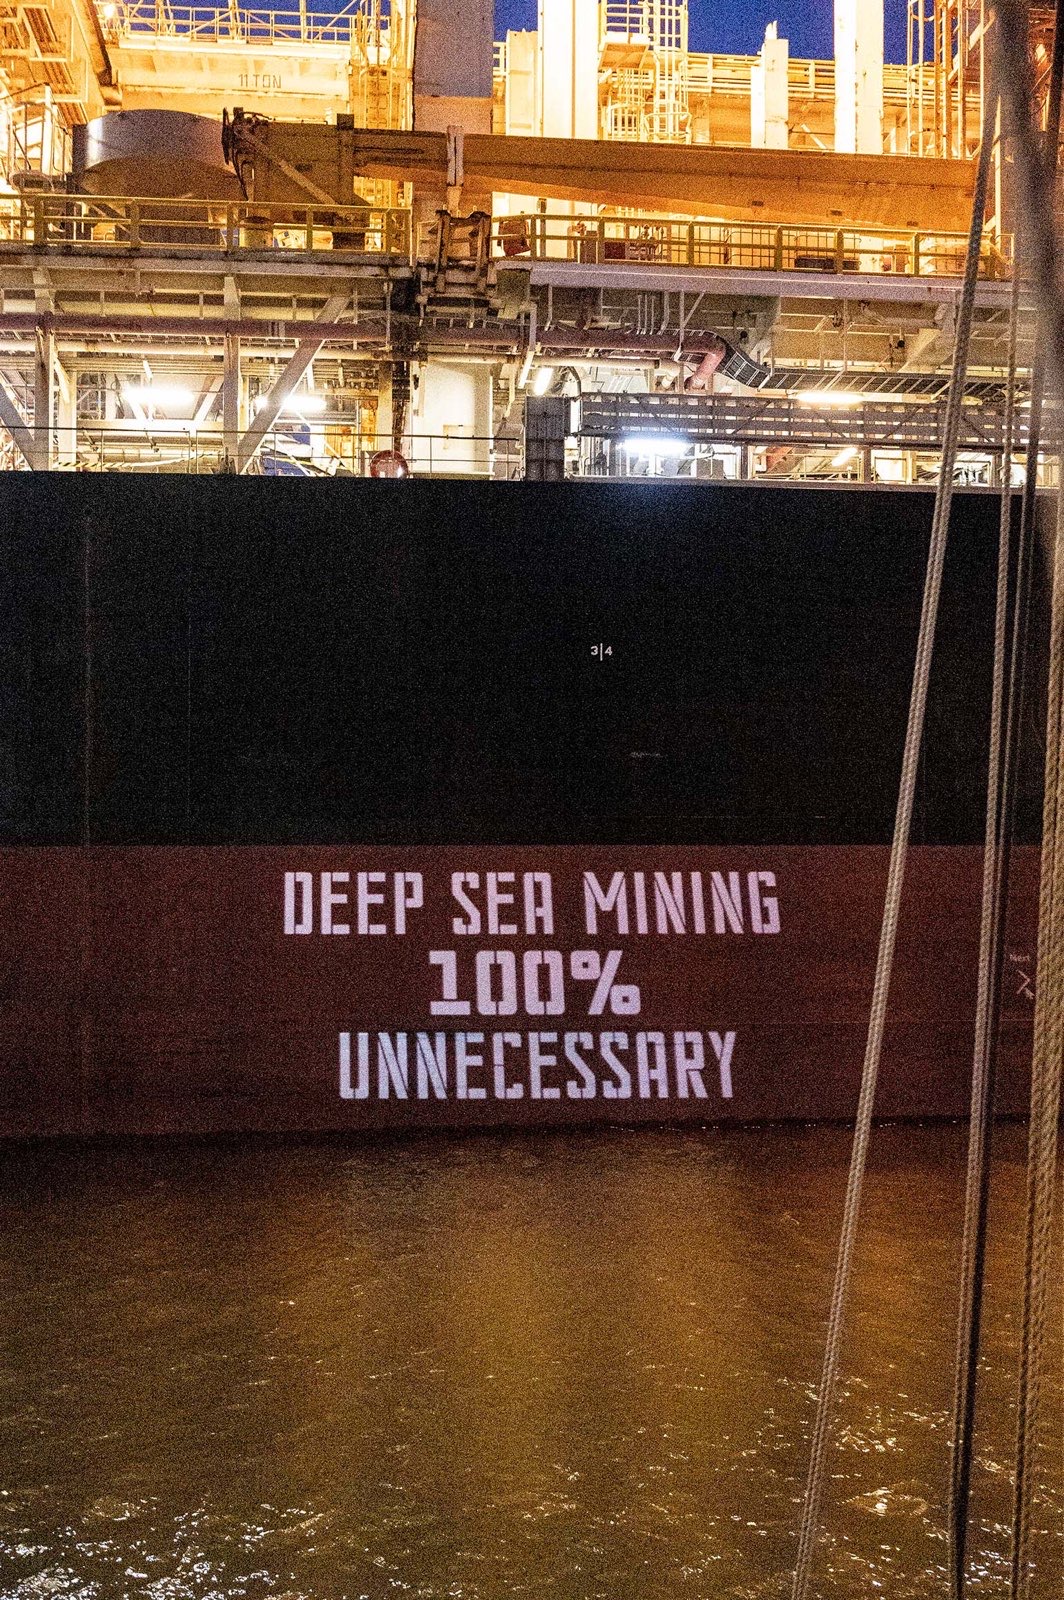 un unfit for purpose international seabed authority - 9960cd91-3702-4fd6-be17-323ad04a34df